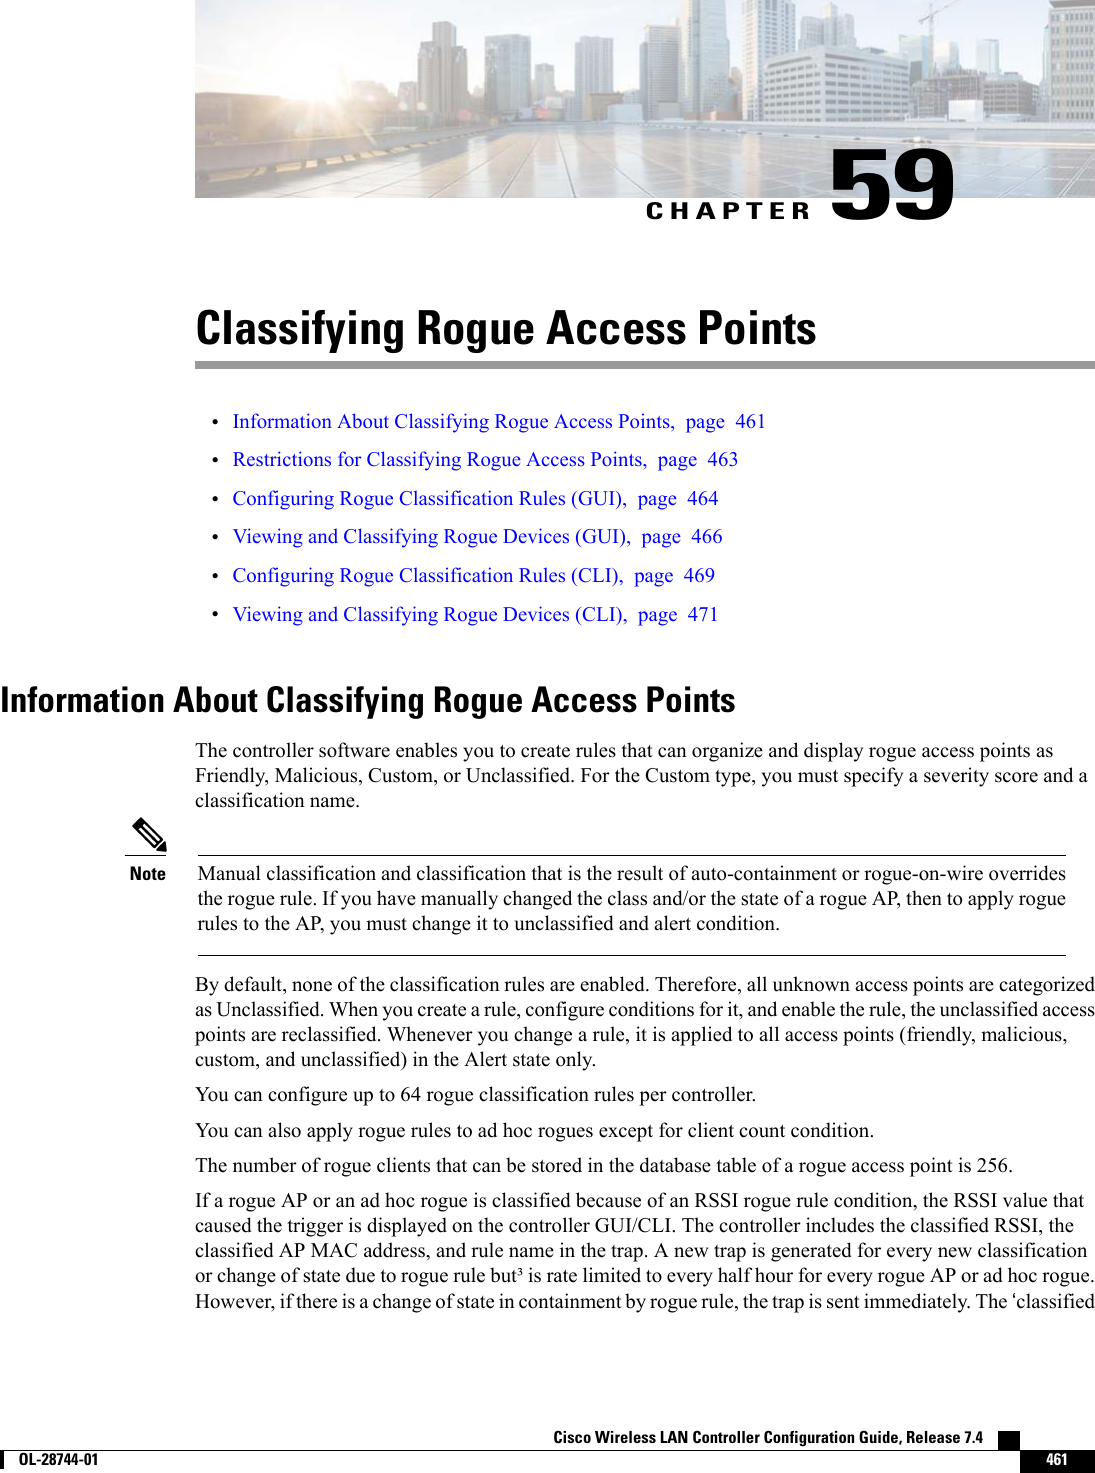 CHAPTER 59Classifying Rogue Access Points•Information About Classifying Rogue Access Points, page 461•Restrictions for Classifying Rogue Access Points, page 463•Configuring Rogue Classification Rules (GUI), page 464•Viewing and Classifying Rogue Devices (GUI), page 466•Configuring Rogue Classification Rules (CLI), page 469•Viewing and Classifying Rogue Devices (CLI), page 471Information About Classifying Rogue Access PointsThe controller software enables you to create rules that can organize and display rogue access points asFriendly, Malicious, Custom, or Unclassified. For the Custom type, you must specify a severity score and aclassification name.Manual classification and classification that is the result of auto-containment or rogue-on-wire overridesthe rogue rule. If you have manually changed the class and/or the state of a rogue AP, then to apply roguerules to the AP, you must change it to unclassified and alert condition.NoteBy default, none of the classification rules are enabled. Therefore, all unknown access points are categorizedas Unclassified. When you create a rule, configure conditions for it, and enable the rule, the unclassified accesspoints are reclassified. Whenever you change a rule, it is applied to all access points (friendly, malicious,custom, and unclassified) in the Alert state only.You can configure up to 64 rogue classification rules per controller.You can also apply rogue rules to ad hoc rogues except for client count condition.The number of rogue clients that can be stored in the database table of a rogue access point is 256.If a rogue AP or an ad hoc rogue is classified because of an RSSI rogue rule condition, the RSSI value thatcaused the trigger is displayed on the controller GUI/CLI. The controller includes the classified RSSI, theclassified AP MAC address, and rule name in the trap. A new trap is generated for every new classificationor change of state due to rogue rule but³ is rate limited to every half hour for every rogue AP or ad hoc rogue.However, if there is a change of state in containment by rogue rule, the trap is sent immediately. The ‘classifiedCisco Wireless LAN Controller Configuration Guide, Release 7.4        OL-28744-01 461